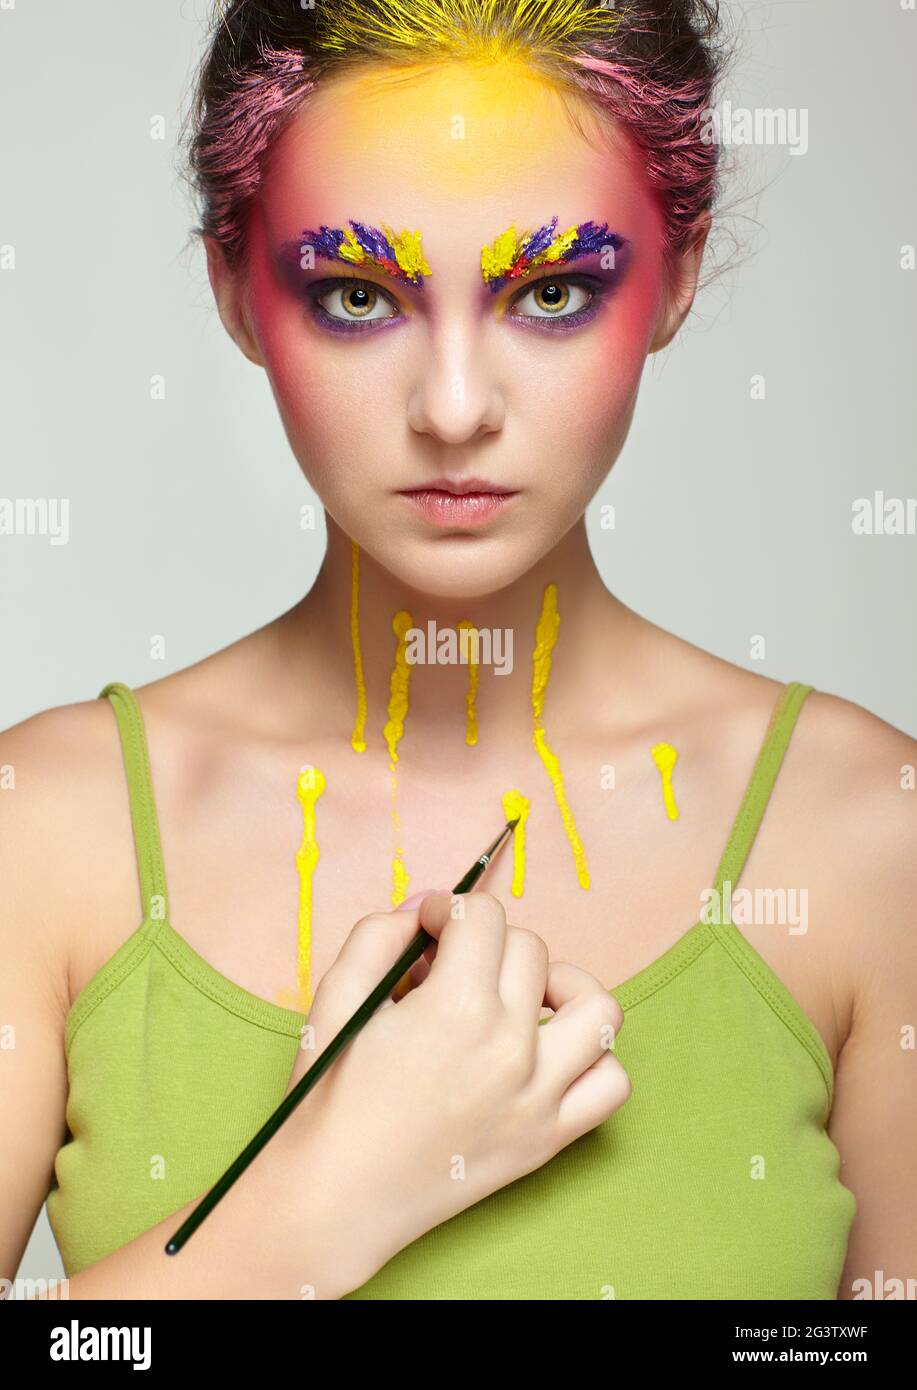 Female portrait with unusual face and body art make-up. Woman paints herself with a brush. Stock Photo